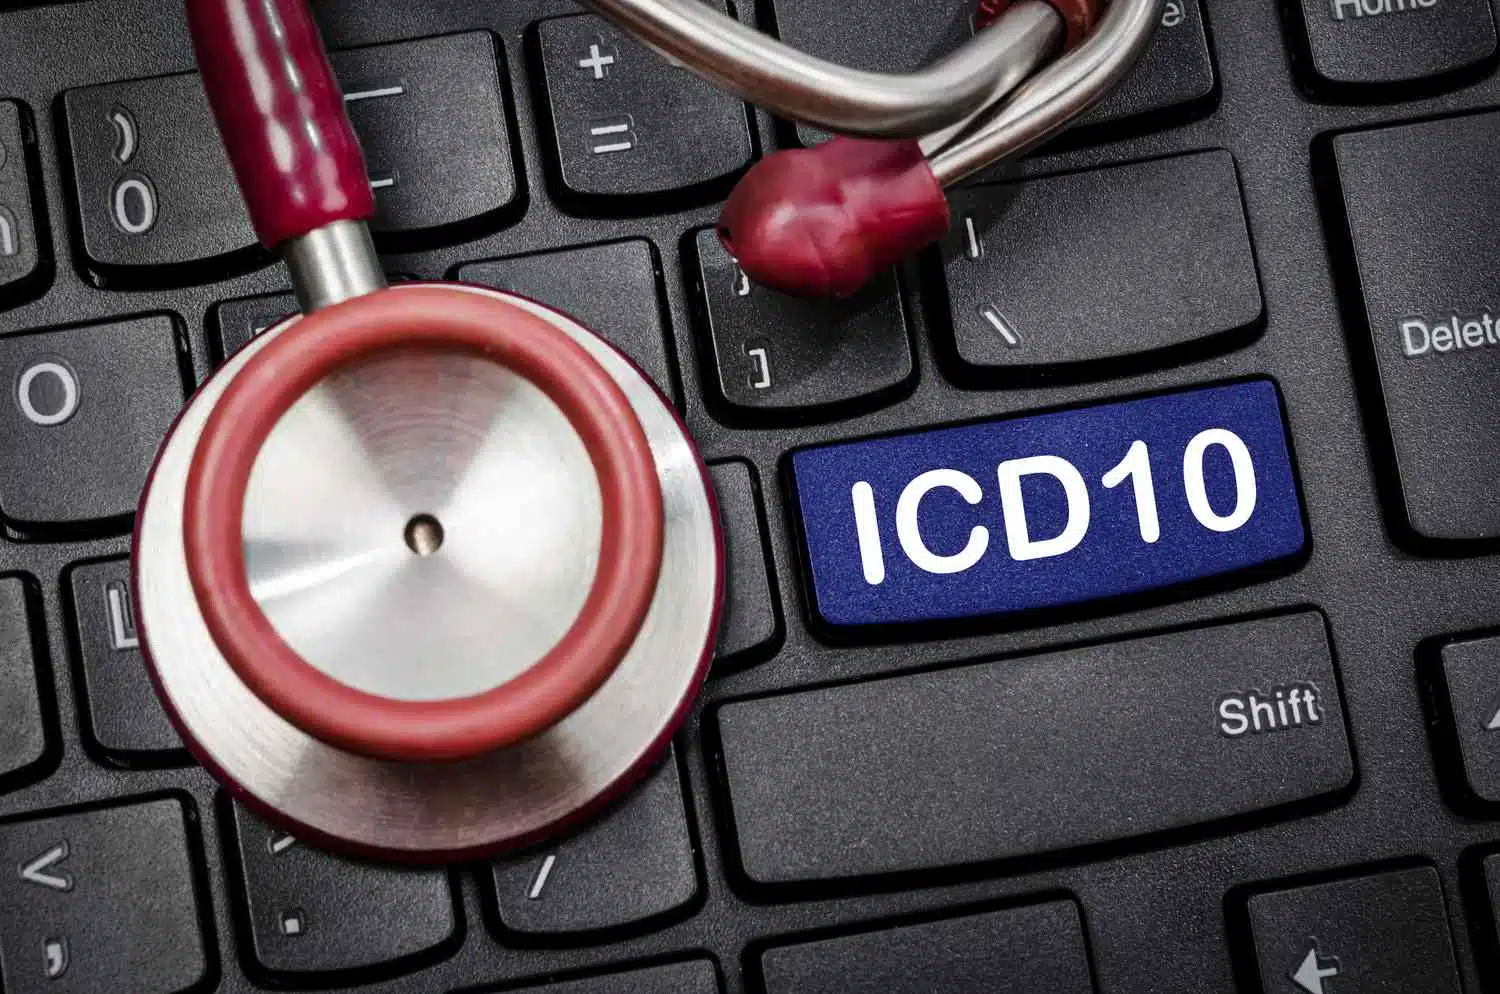 ICD-10 Code Updates: What's New and Why It Matters